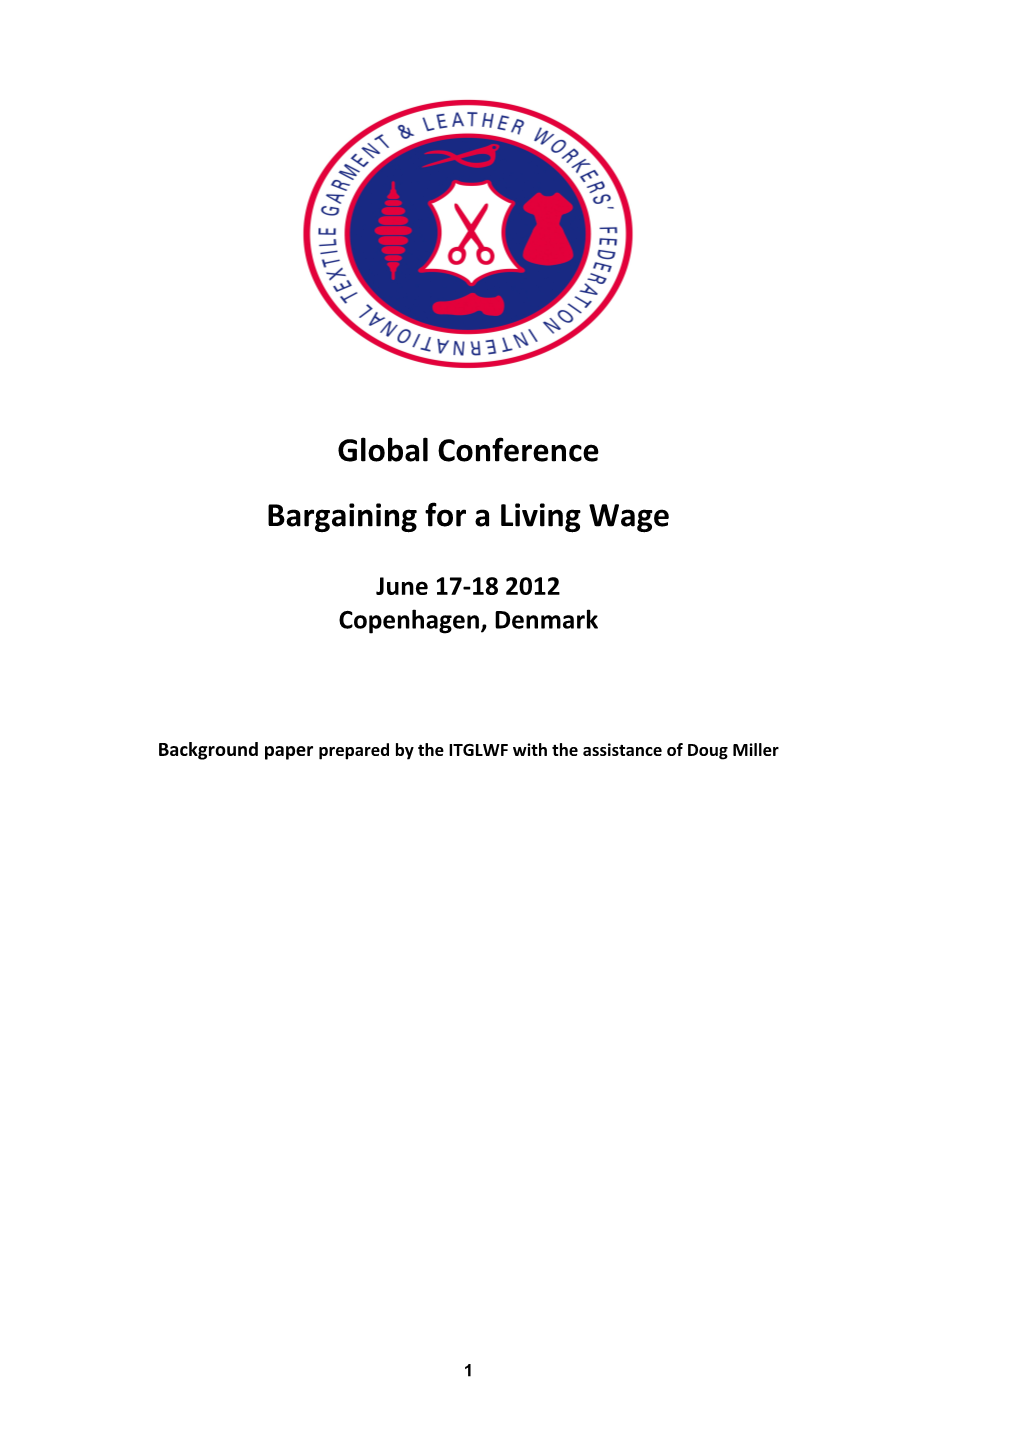 Bargaining for a Living Wage